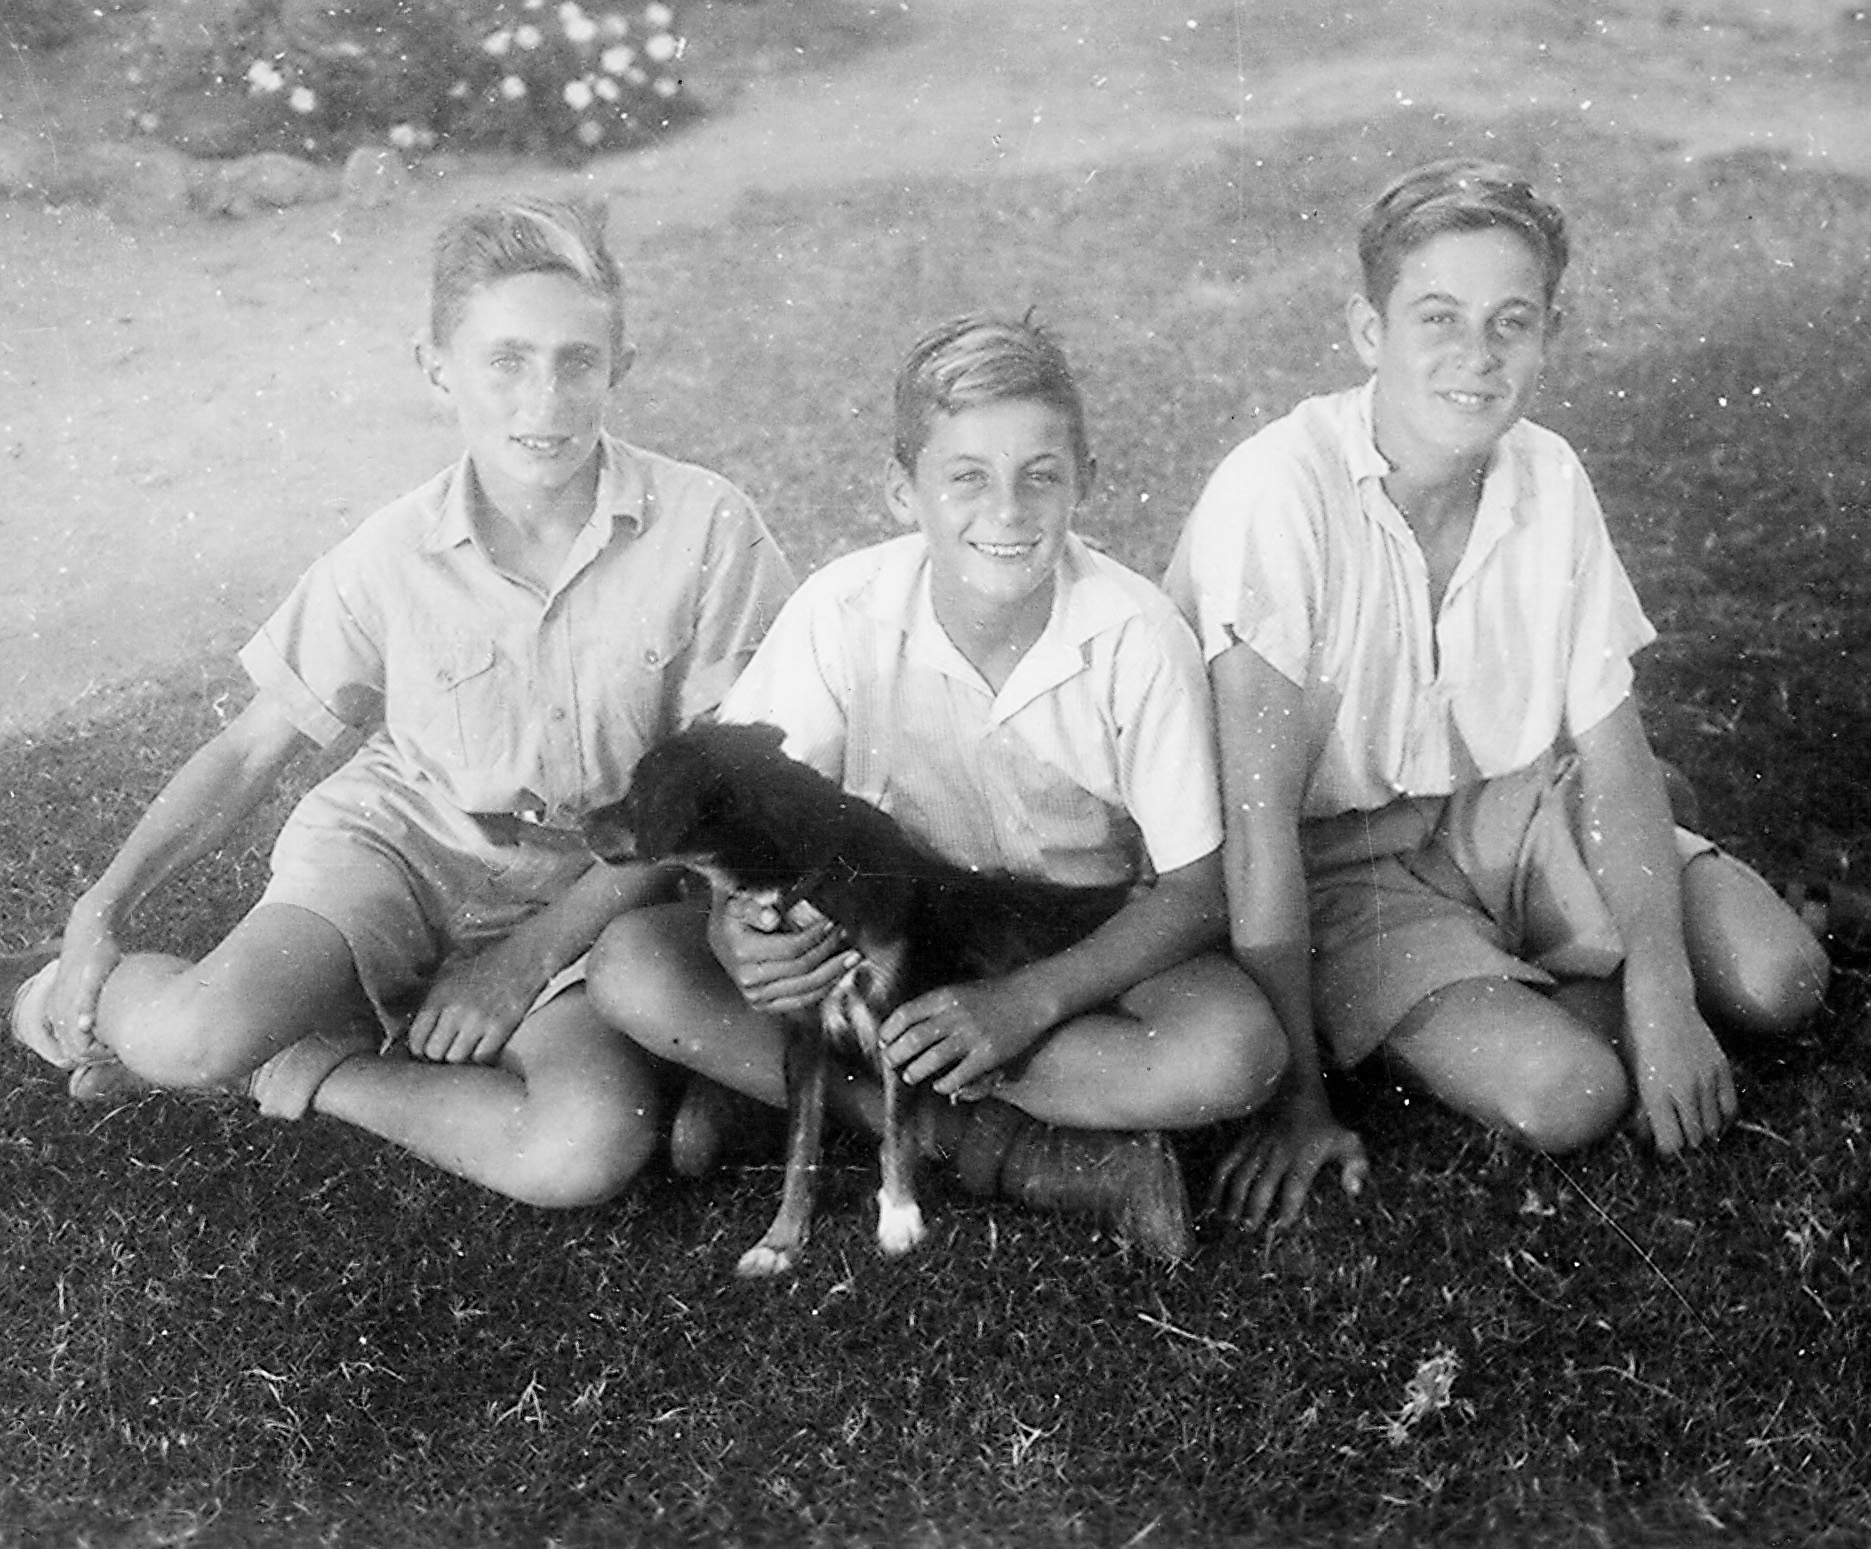 Jakob Fröhlich (far left) with his cousins Elkana and Amos in Shavei Zion, 1941/42.